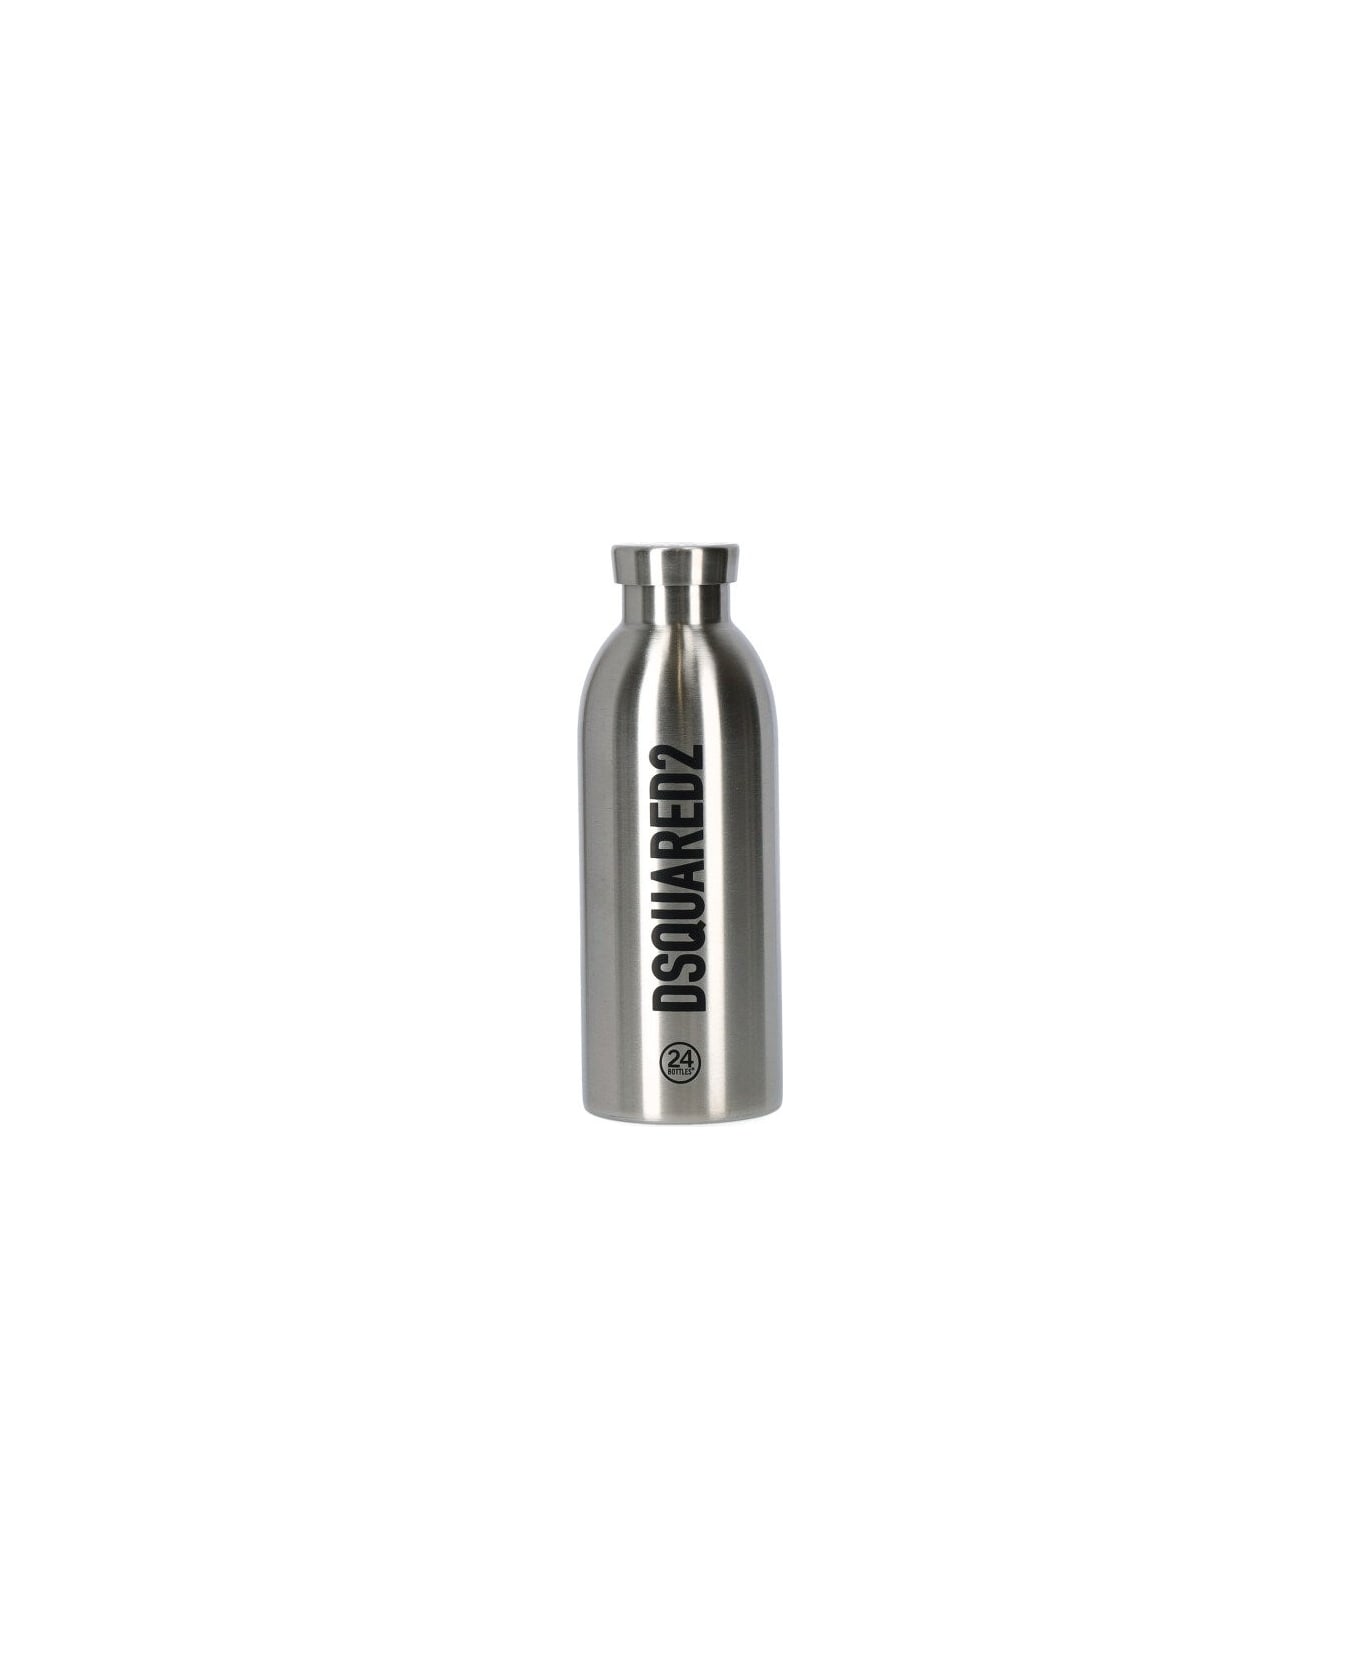 Dsquared2 Travel Lite Silver Water Bottle - Argento